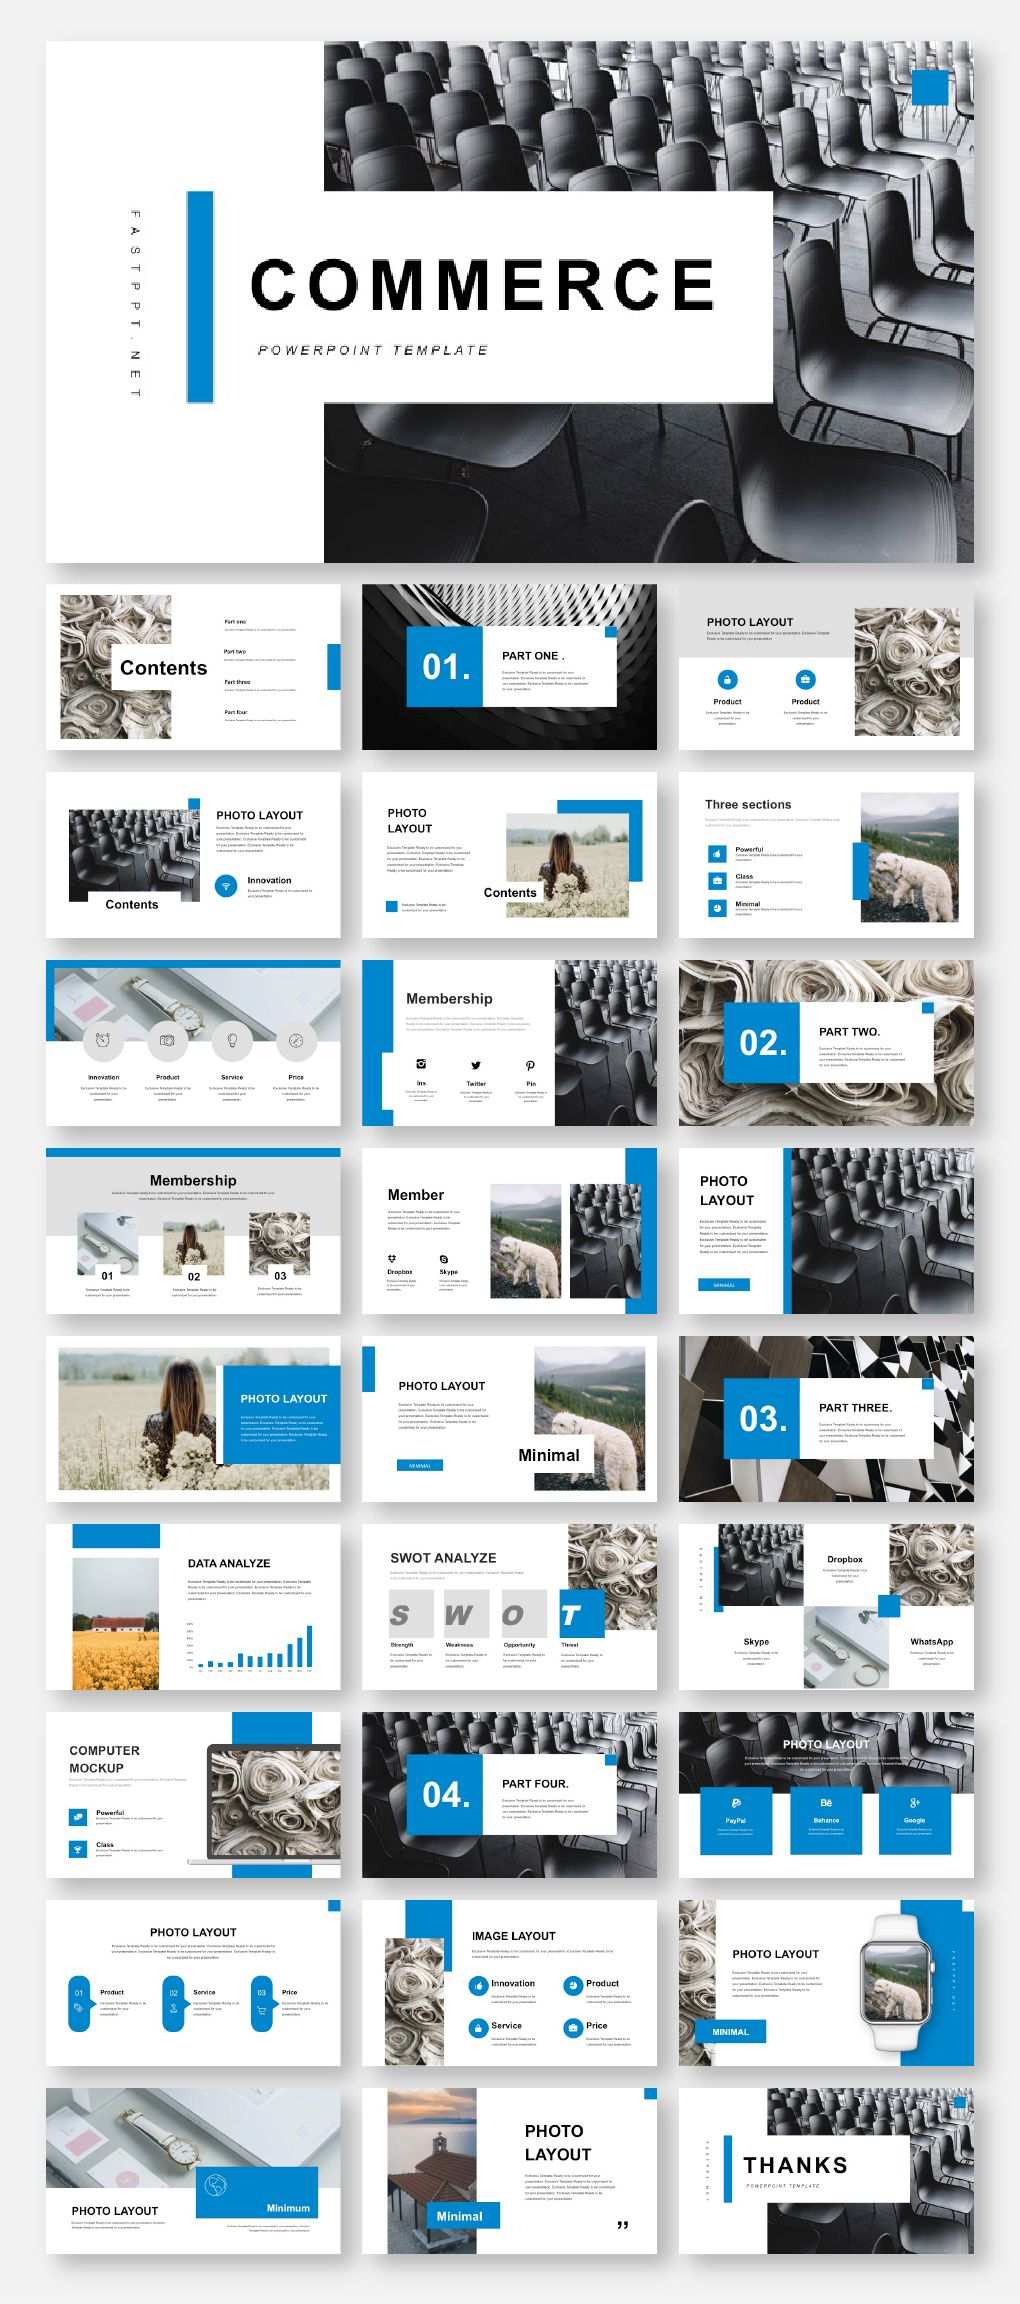 3 In 1 Minimal Creative Professional Powerpoint Template Original And High Quality Powerpoint Templates Professional Powerpoint Templates Powerpoint Design Templates Powerpoint Presentation Design